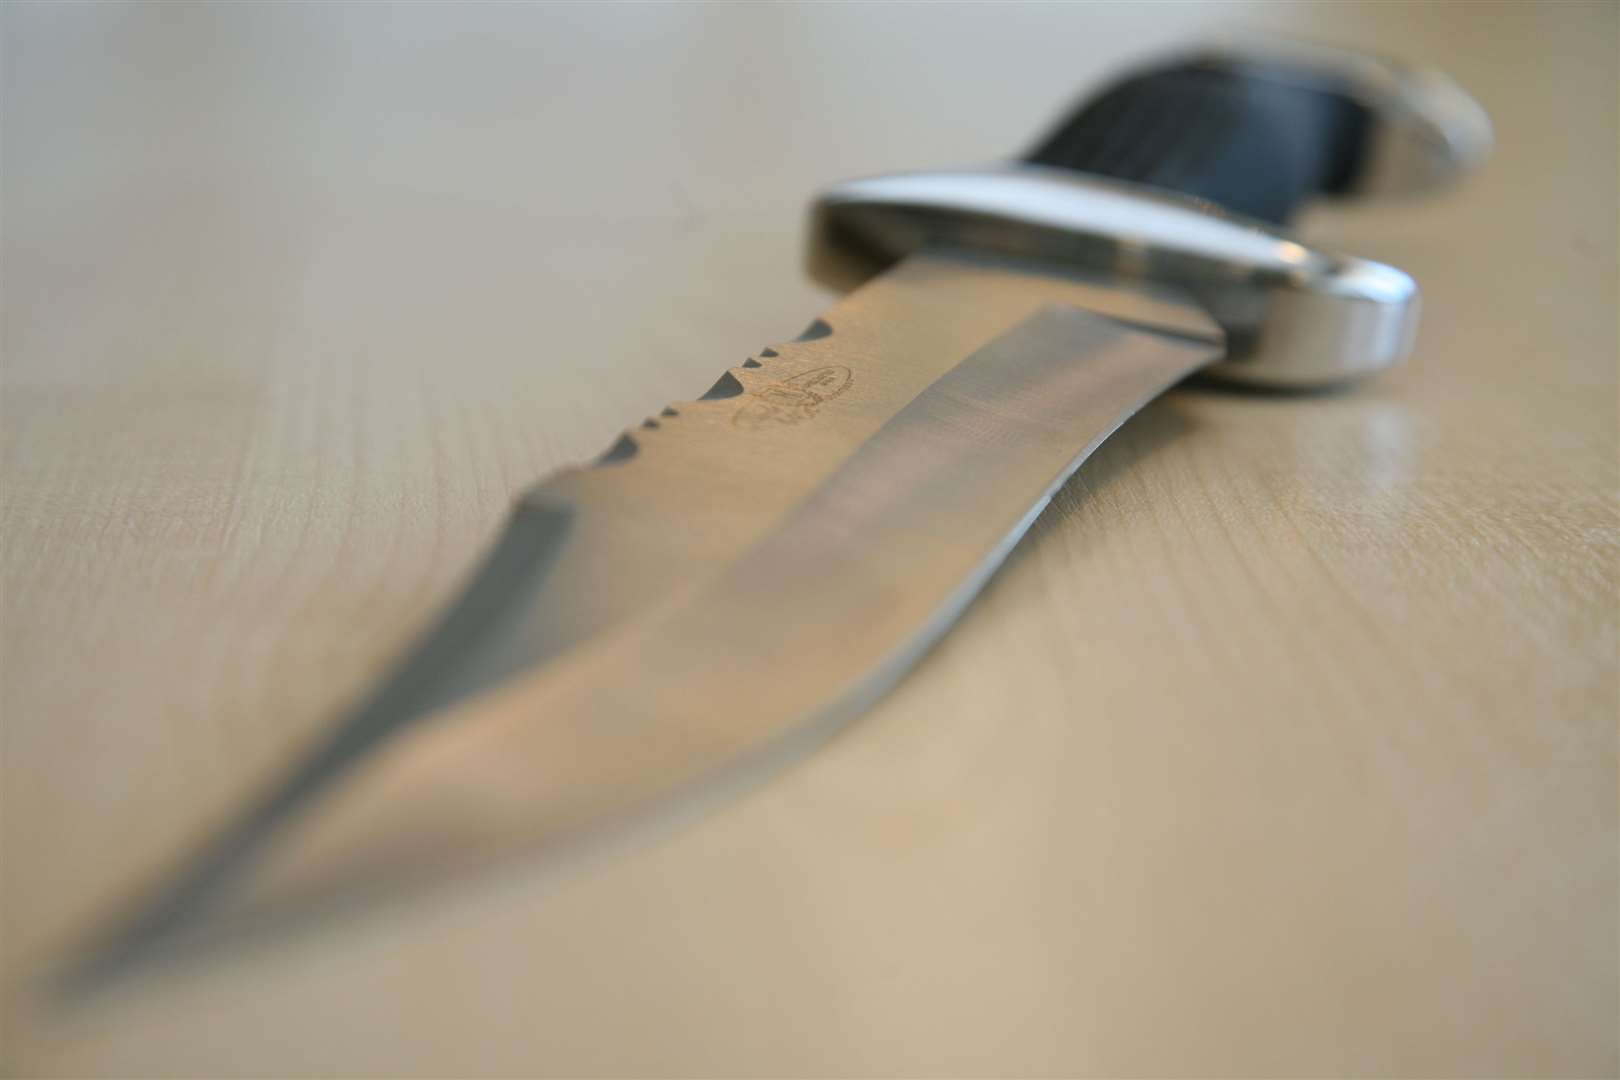 The victim was stabbed three times with a knife similar to this Stock picture: David Antony Hunt